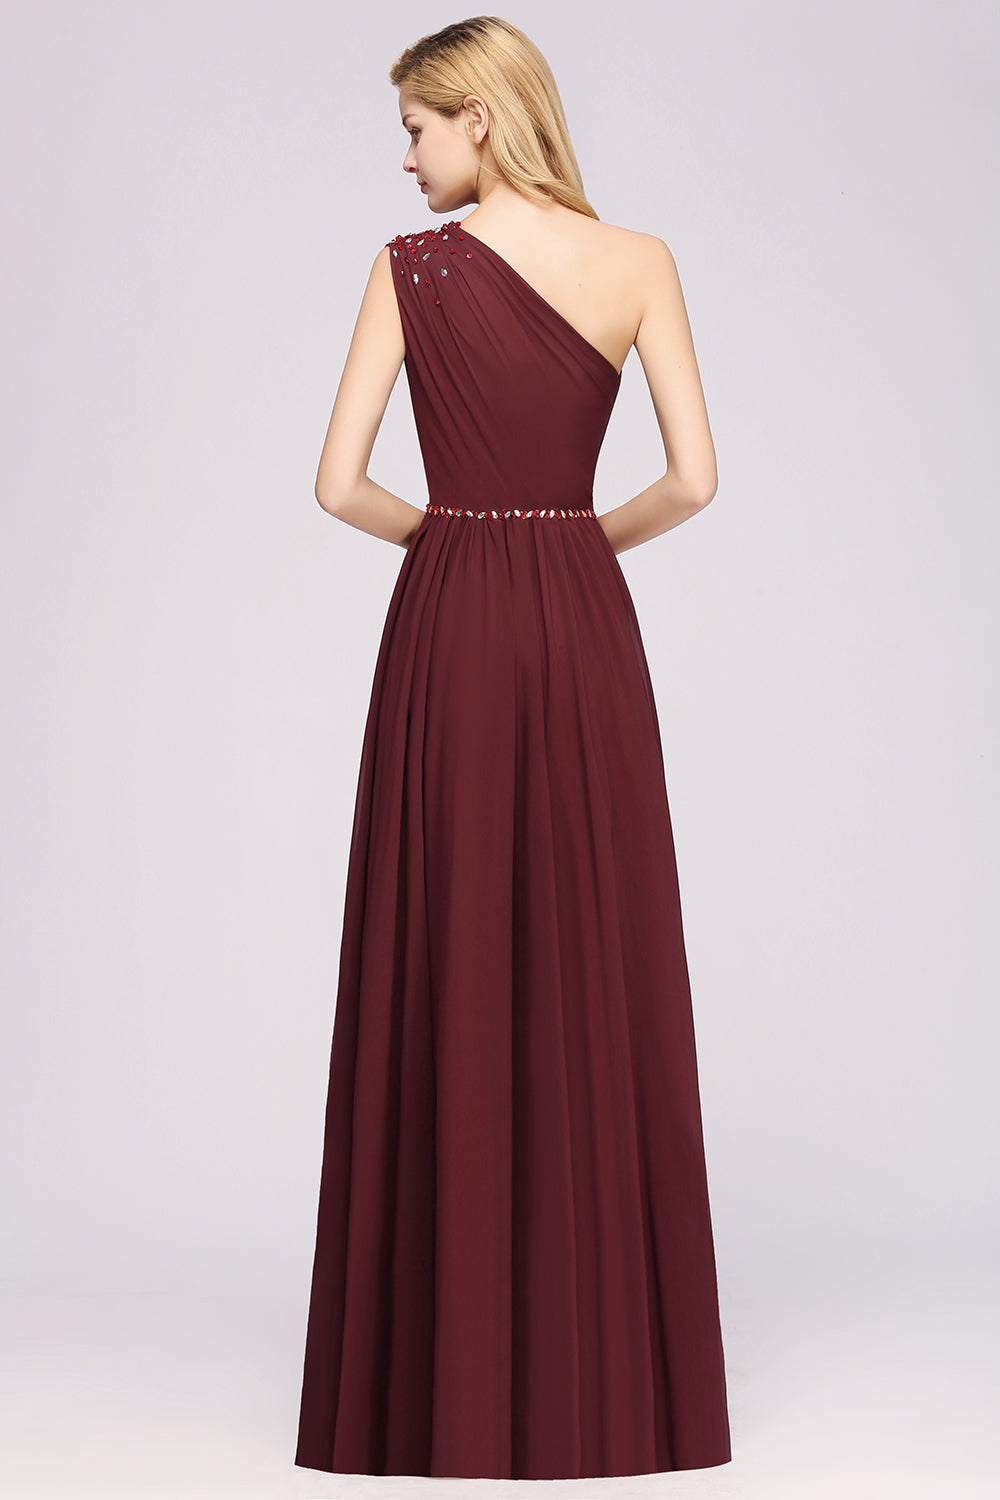 Long A-Line Burgundy Chiffon One Shoulder Bridesmaid Dresses with Beadings-BIZTUNNEL